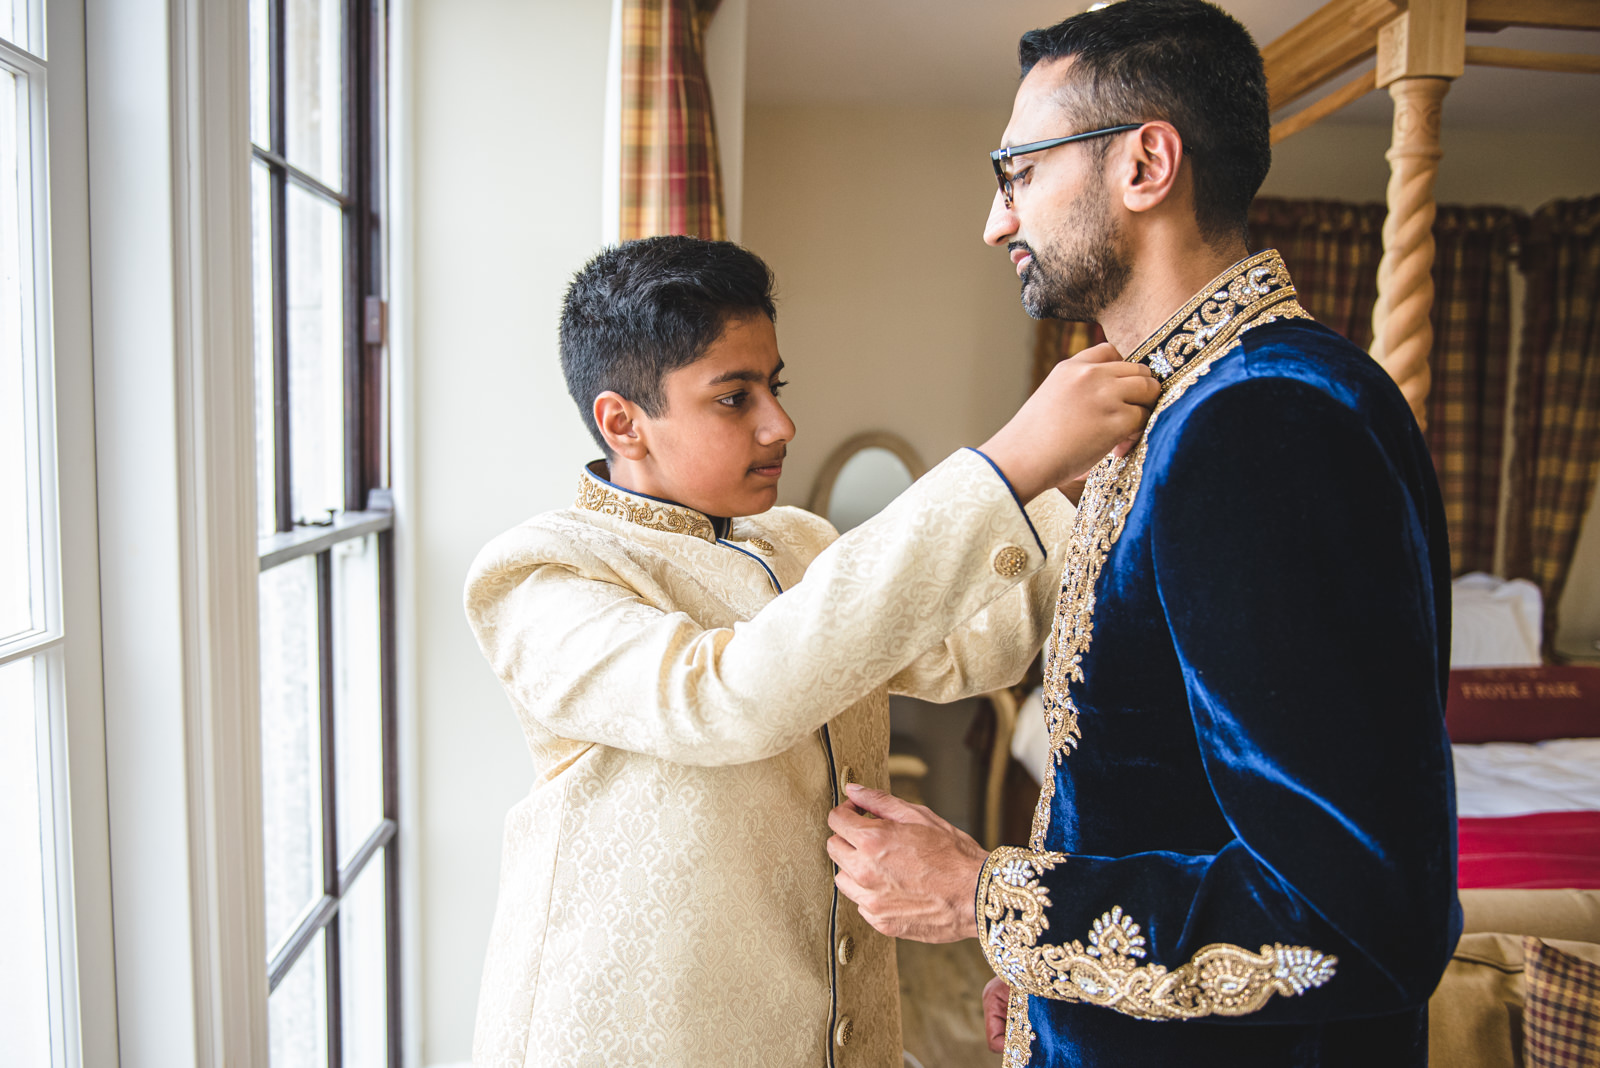 Asian wedding photography at Froyle Park Country Estatre.